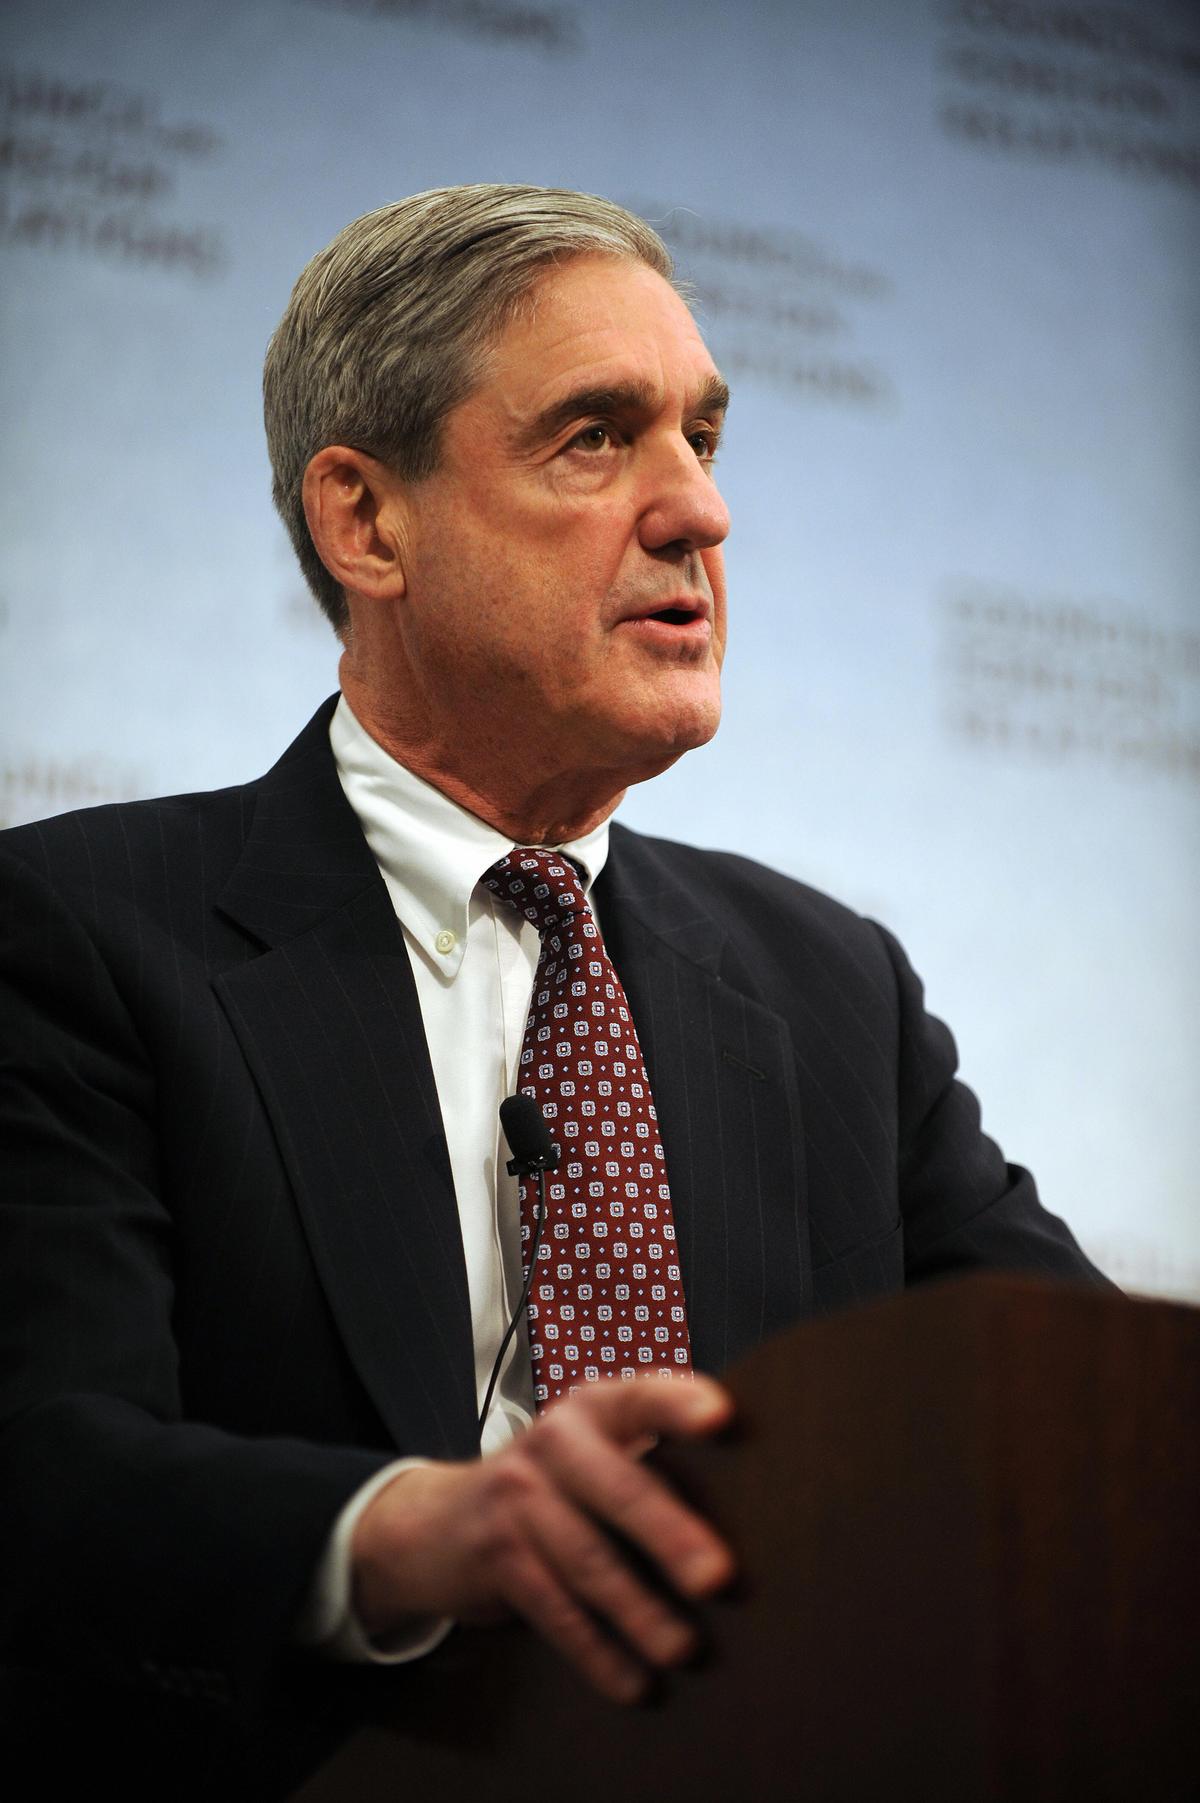 Then-FBI Director Robert Mueller at the Council on Foreign Relations in Washington, DC, on Feb. 23, 2009. (TIM SLOAN/AFP/Getty Images)